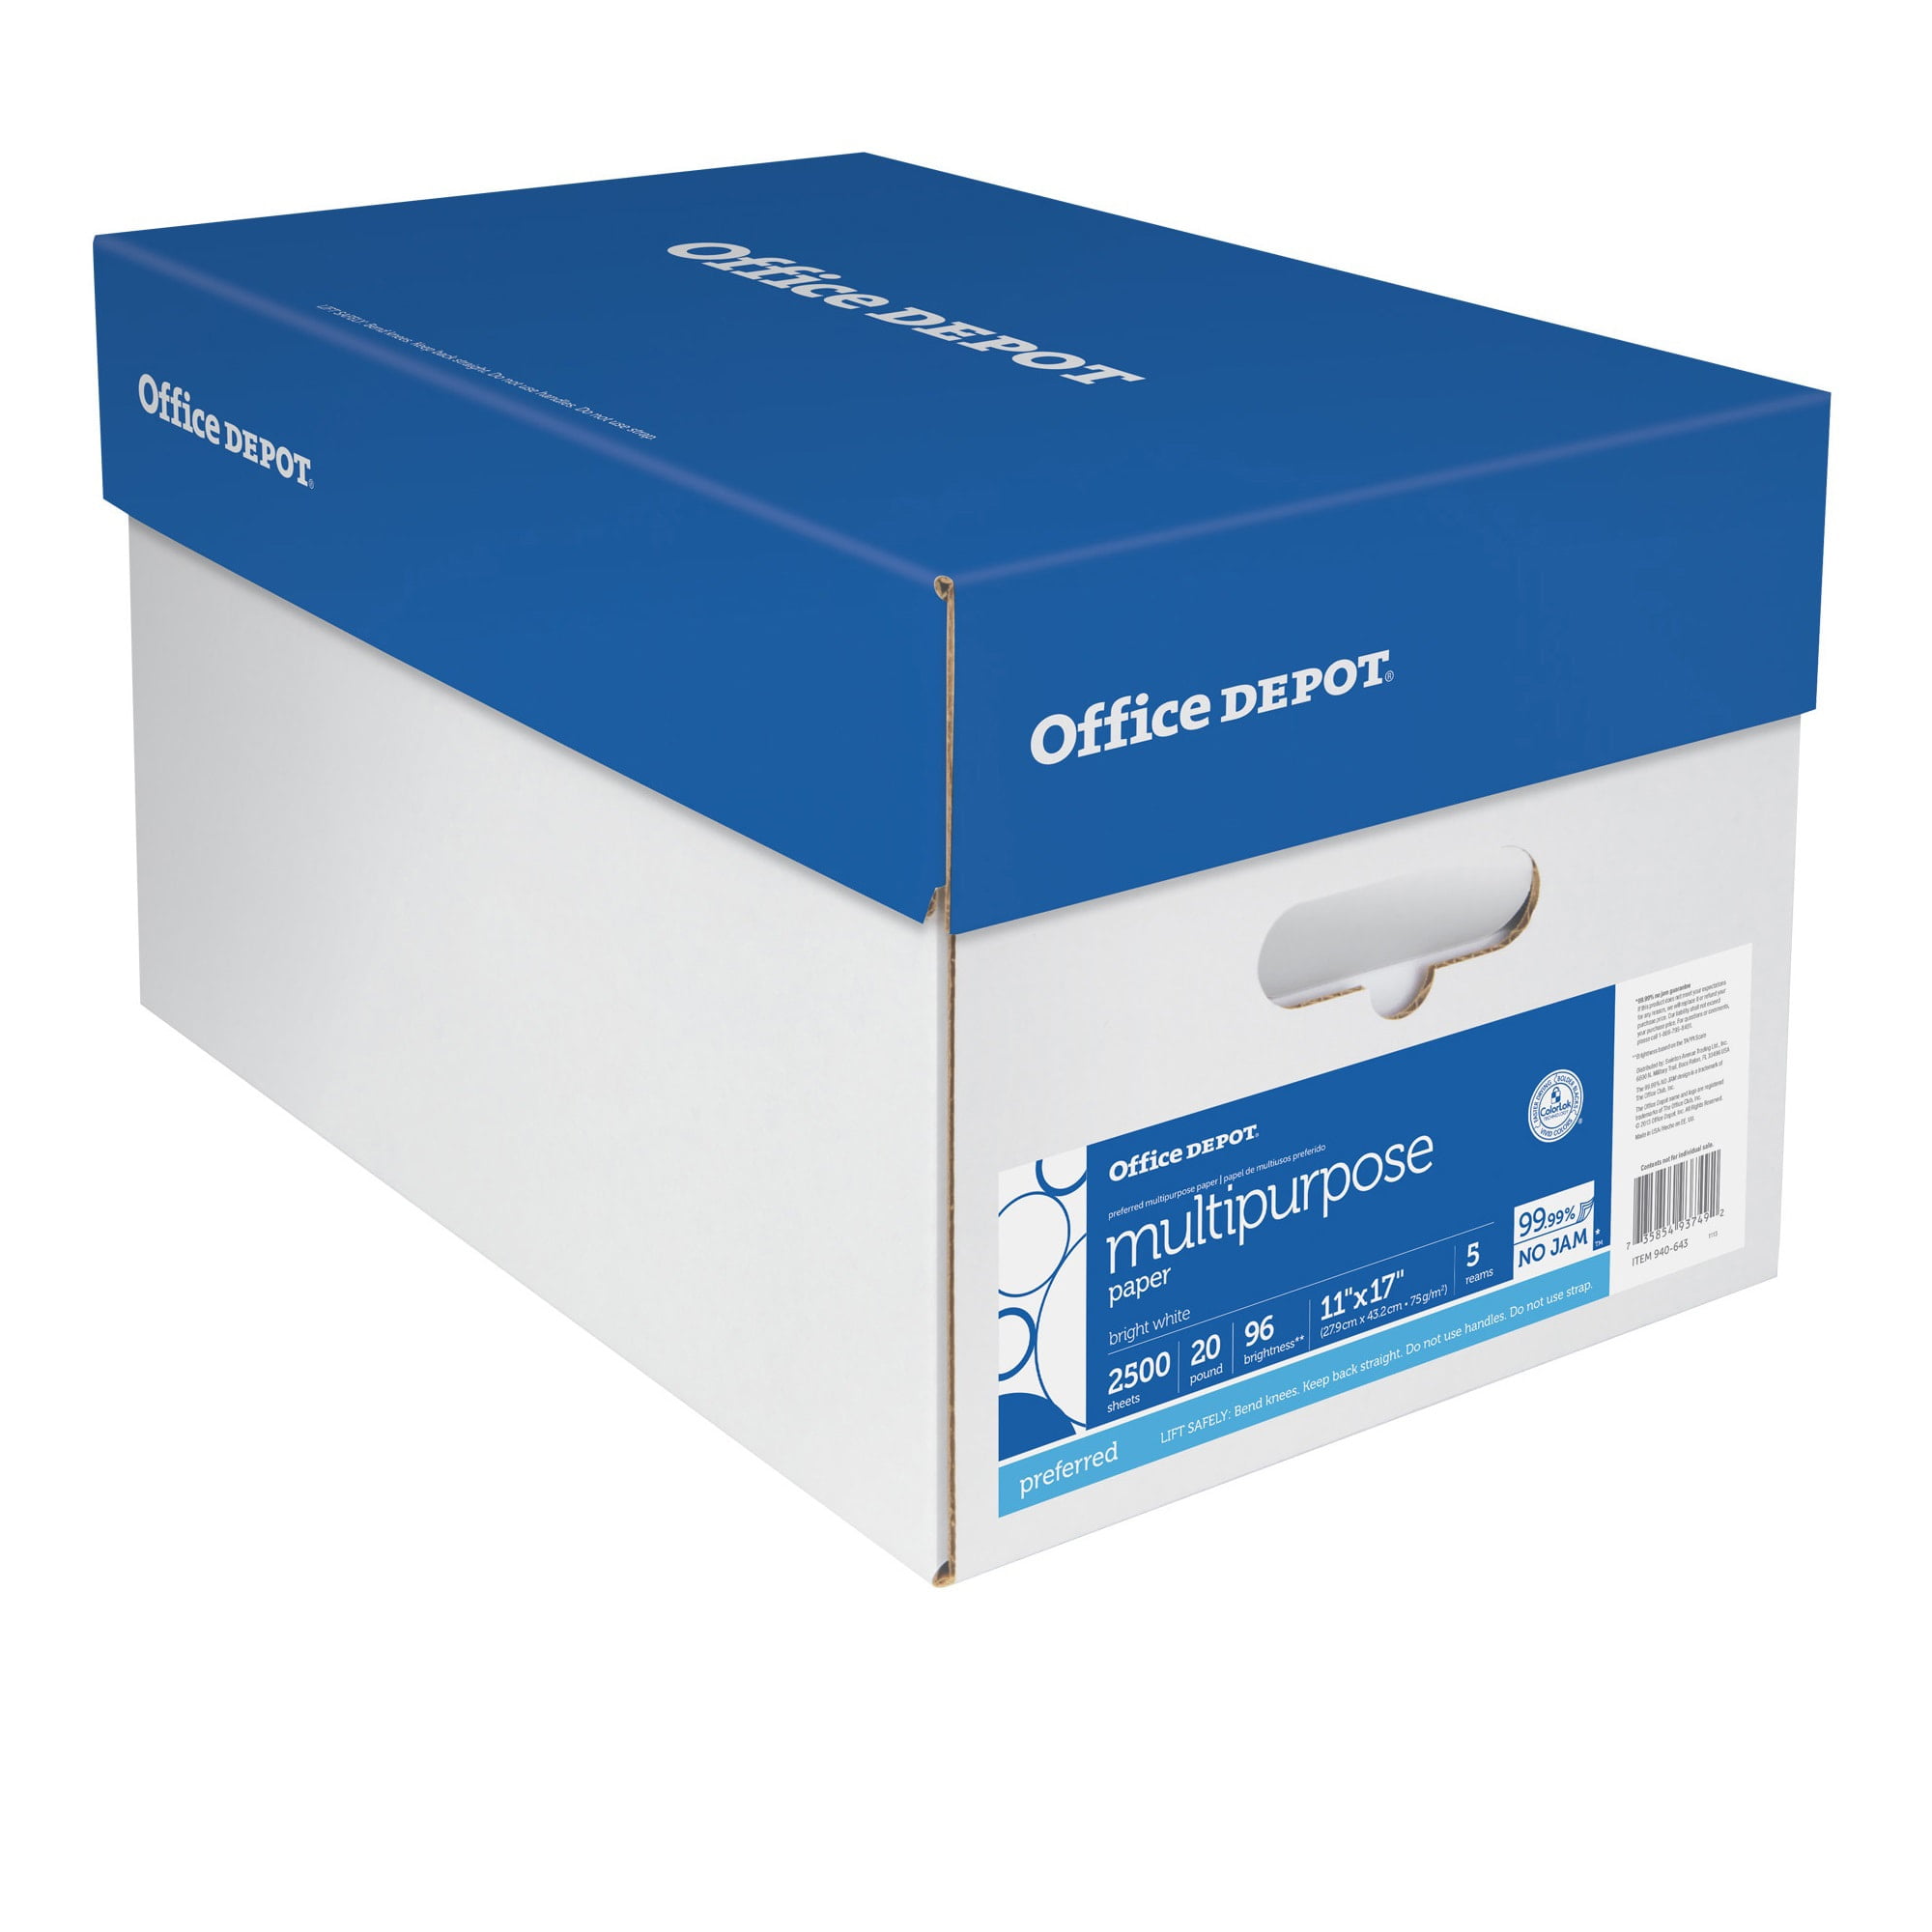 Multipurpose Copy Print Paper, 92 Bright, 20lb, 8.5 x 11, White, 500 Sheets/ Ream - BOSS Office and Computer Products